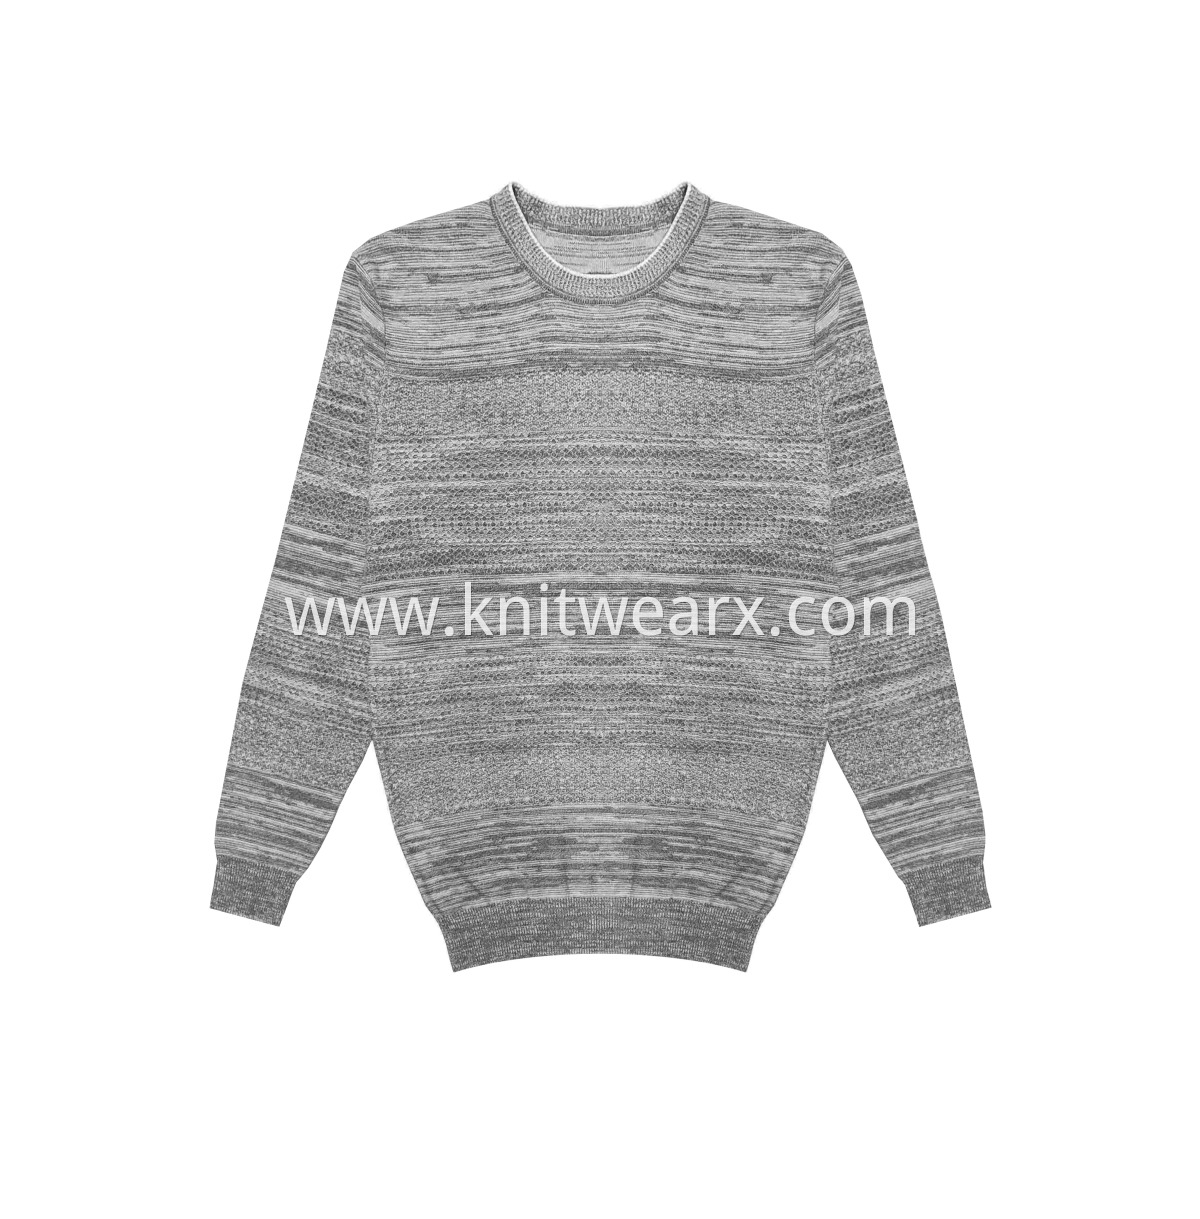 Men's Knitted Sweater Charcoal AB Yarn Crewneck Pullover